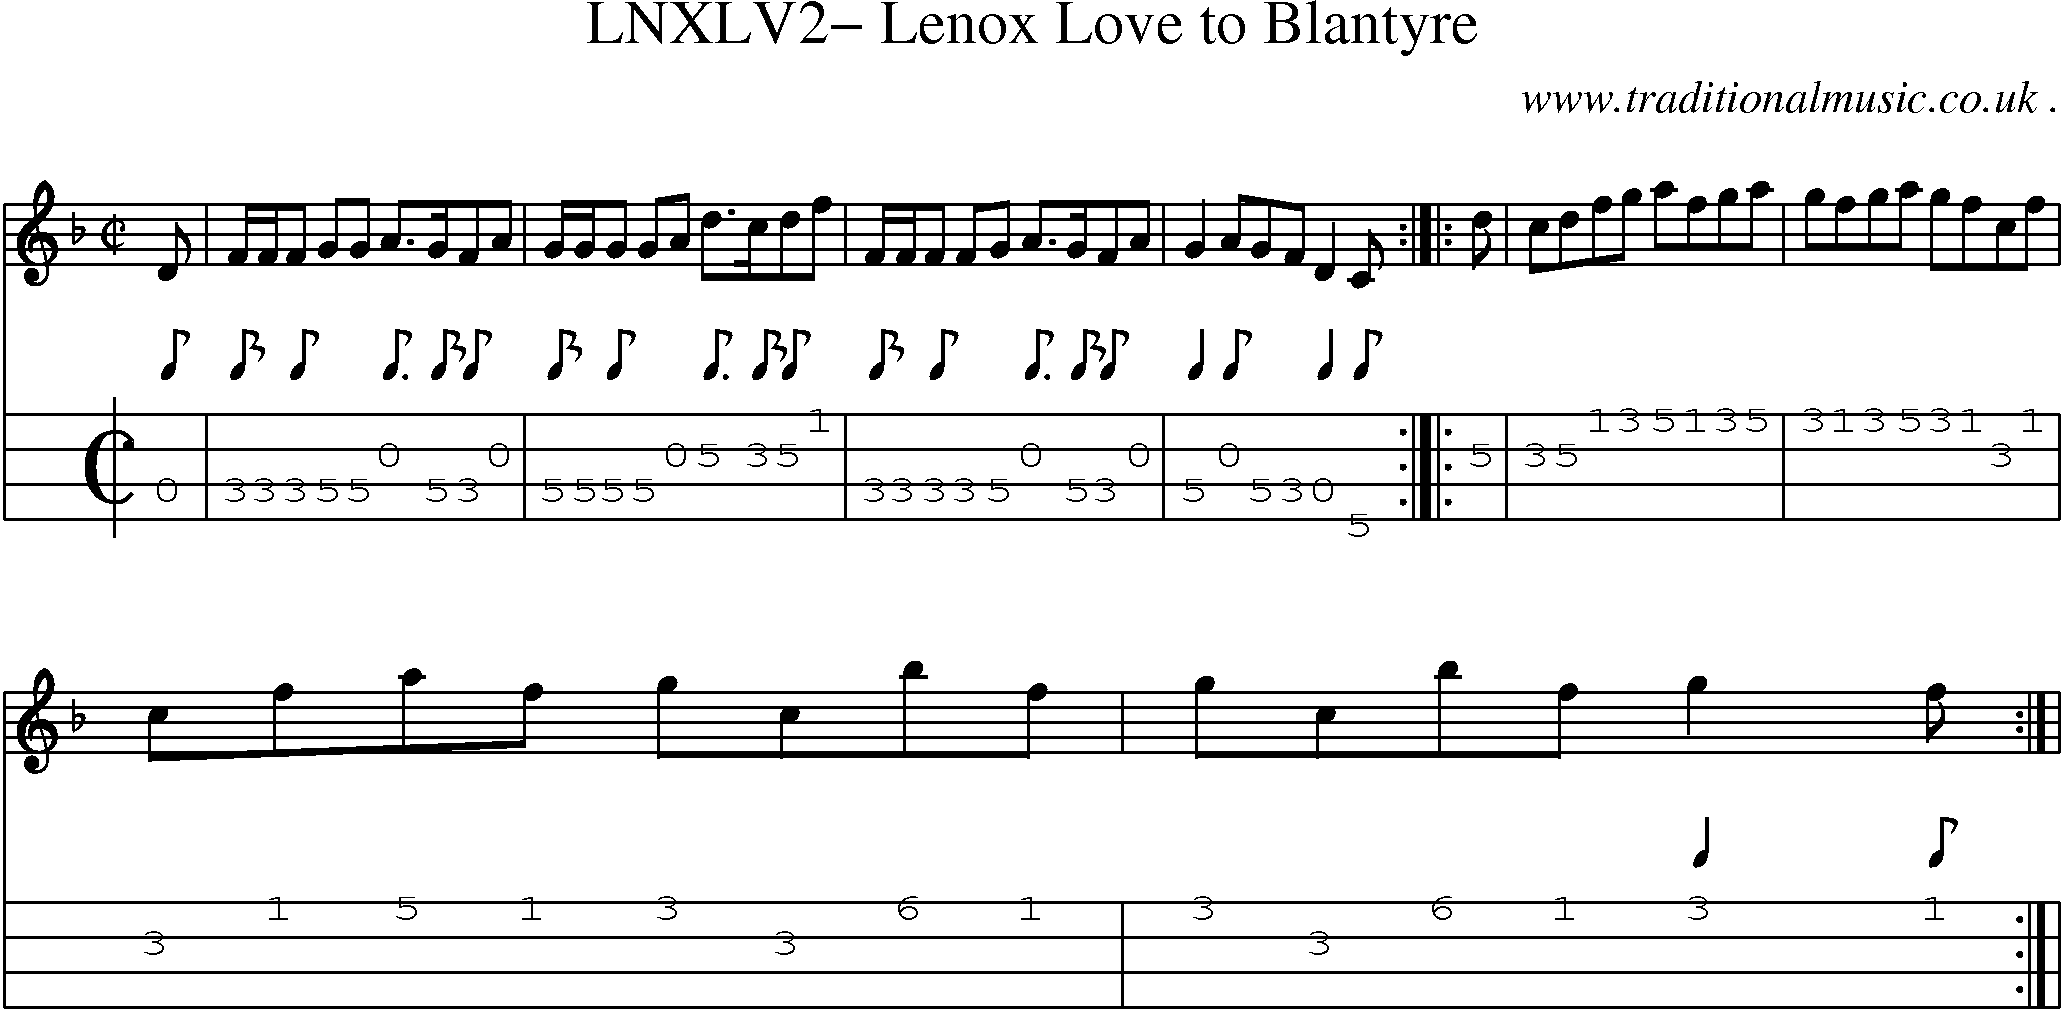 Sheet-Music and Mandolin Tabs for Lnxlv2 Lenox Love To Blantyre